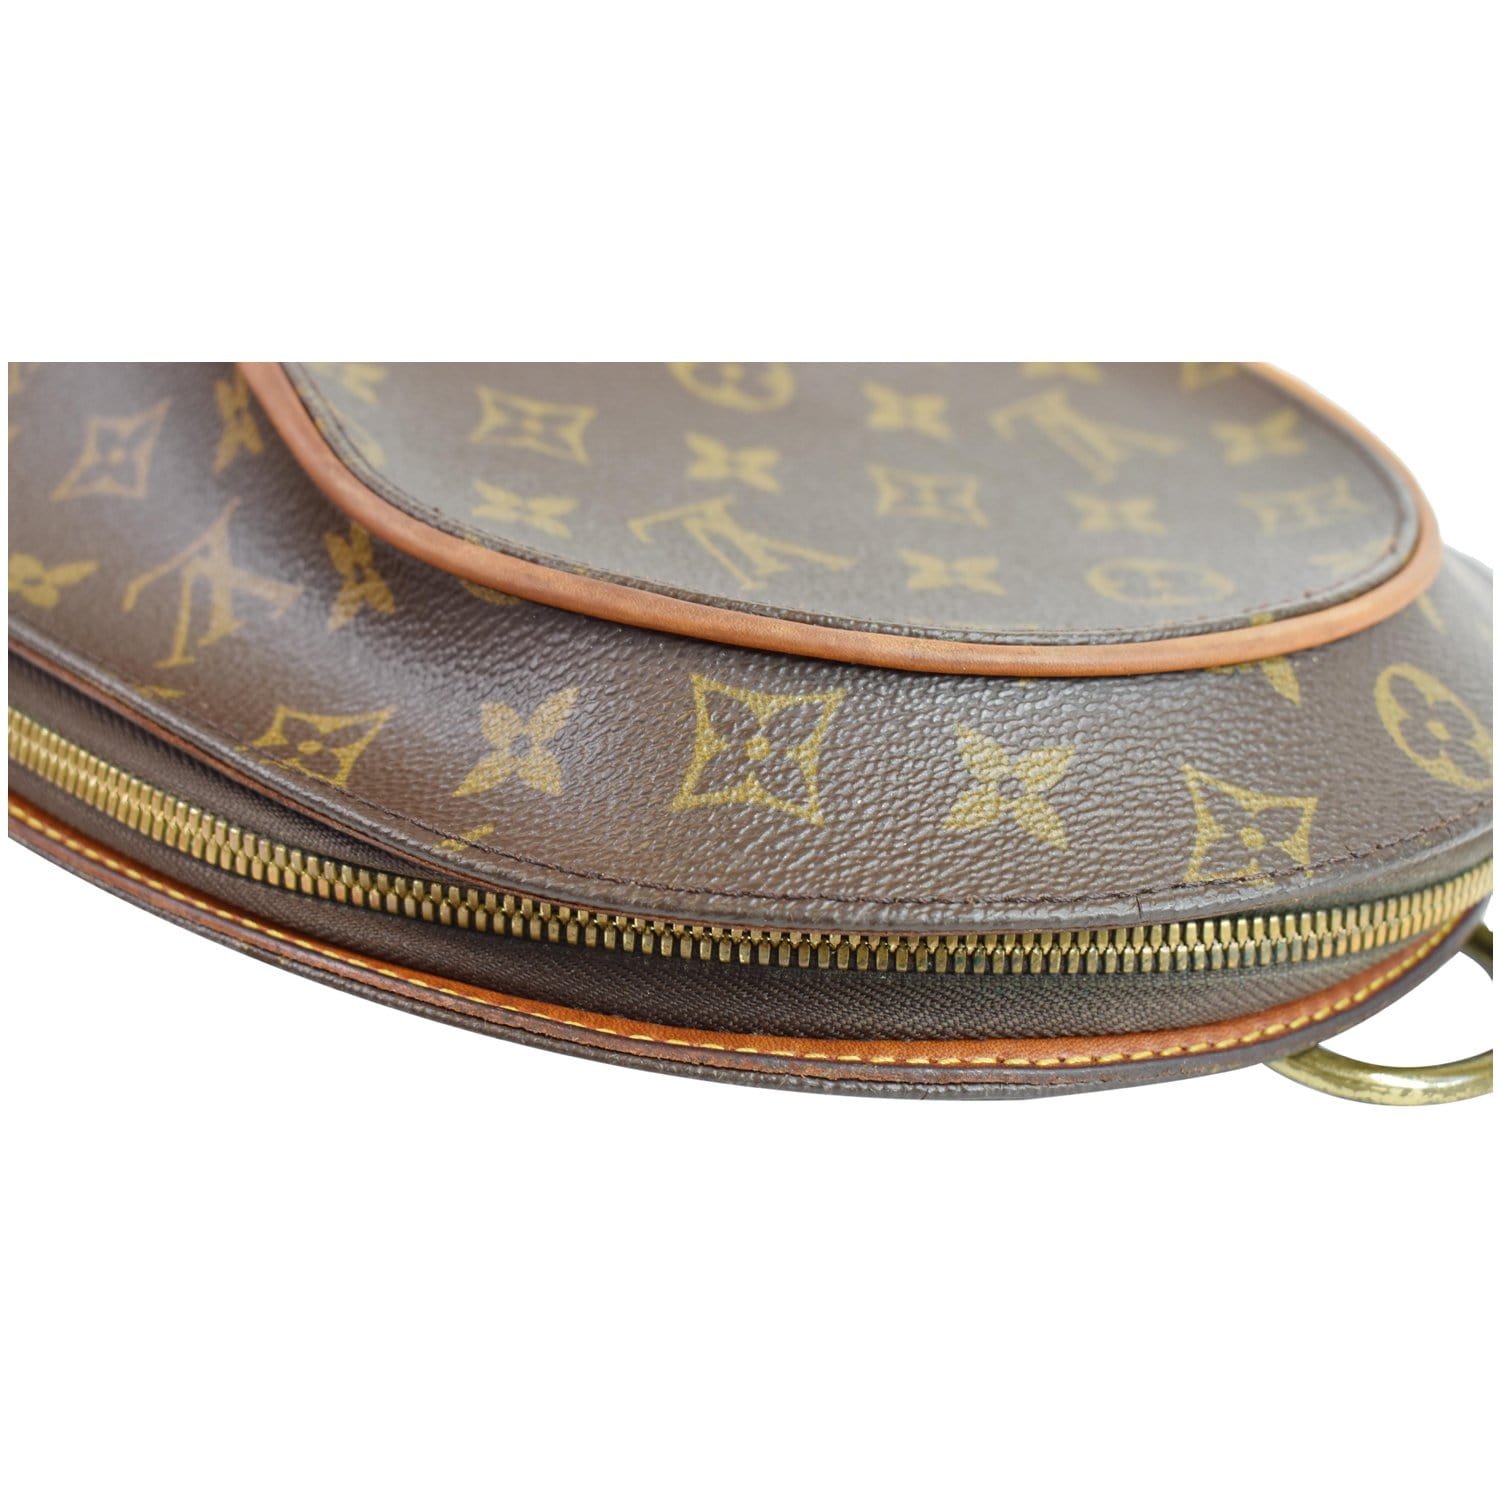 Monogrammed Canvas Suitcase with Zip and Rounded Edges from Louis